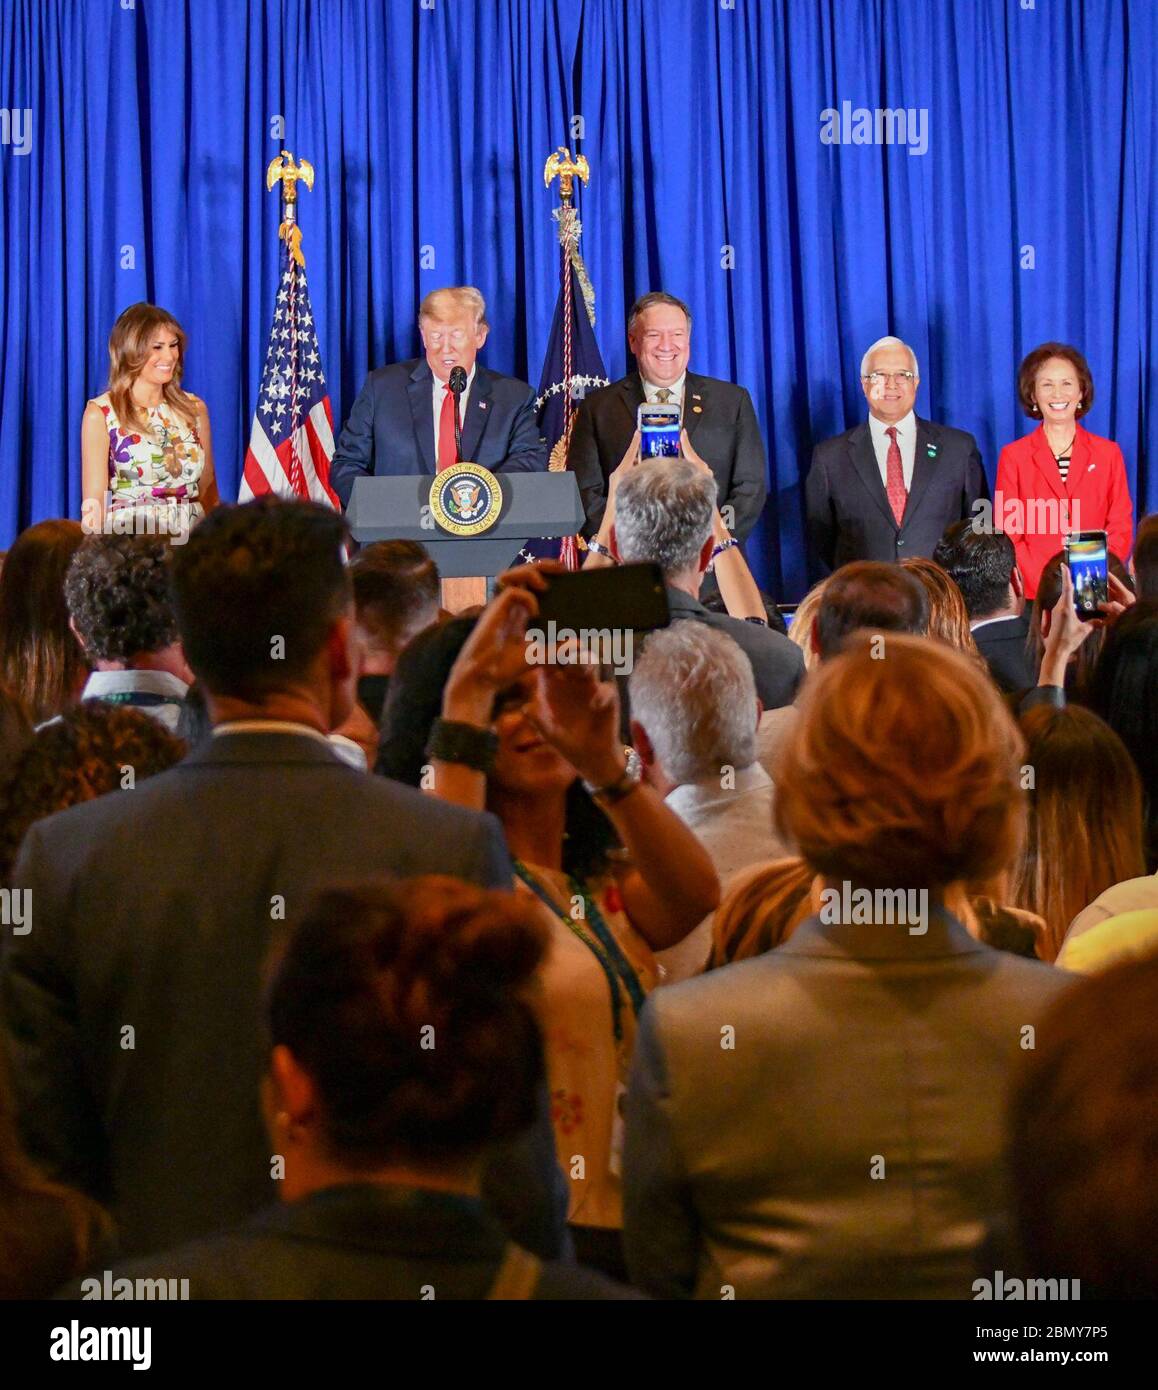 President Trump makes remarks at the U.S. Embassy Buenos Aires meet and greet President Donald Trump conducts a meet and greet with the staff and families of US Embassy Buenos Aires along with Secretary Michael R. Pompeo in Argentina, 30 November 2018. Stock Photo